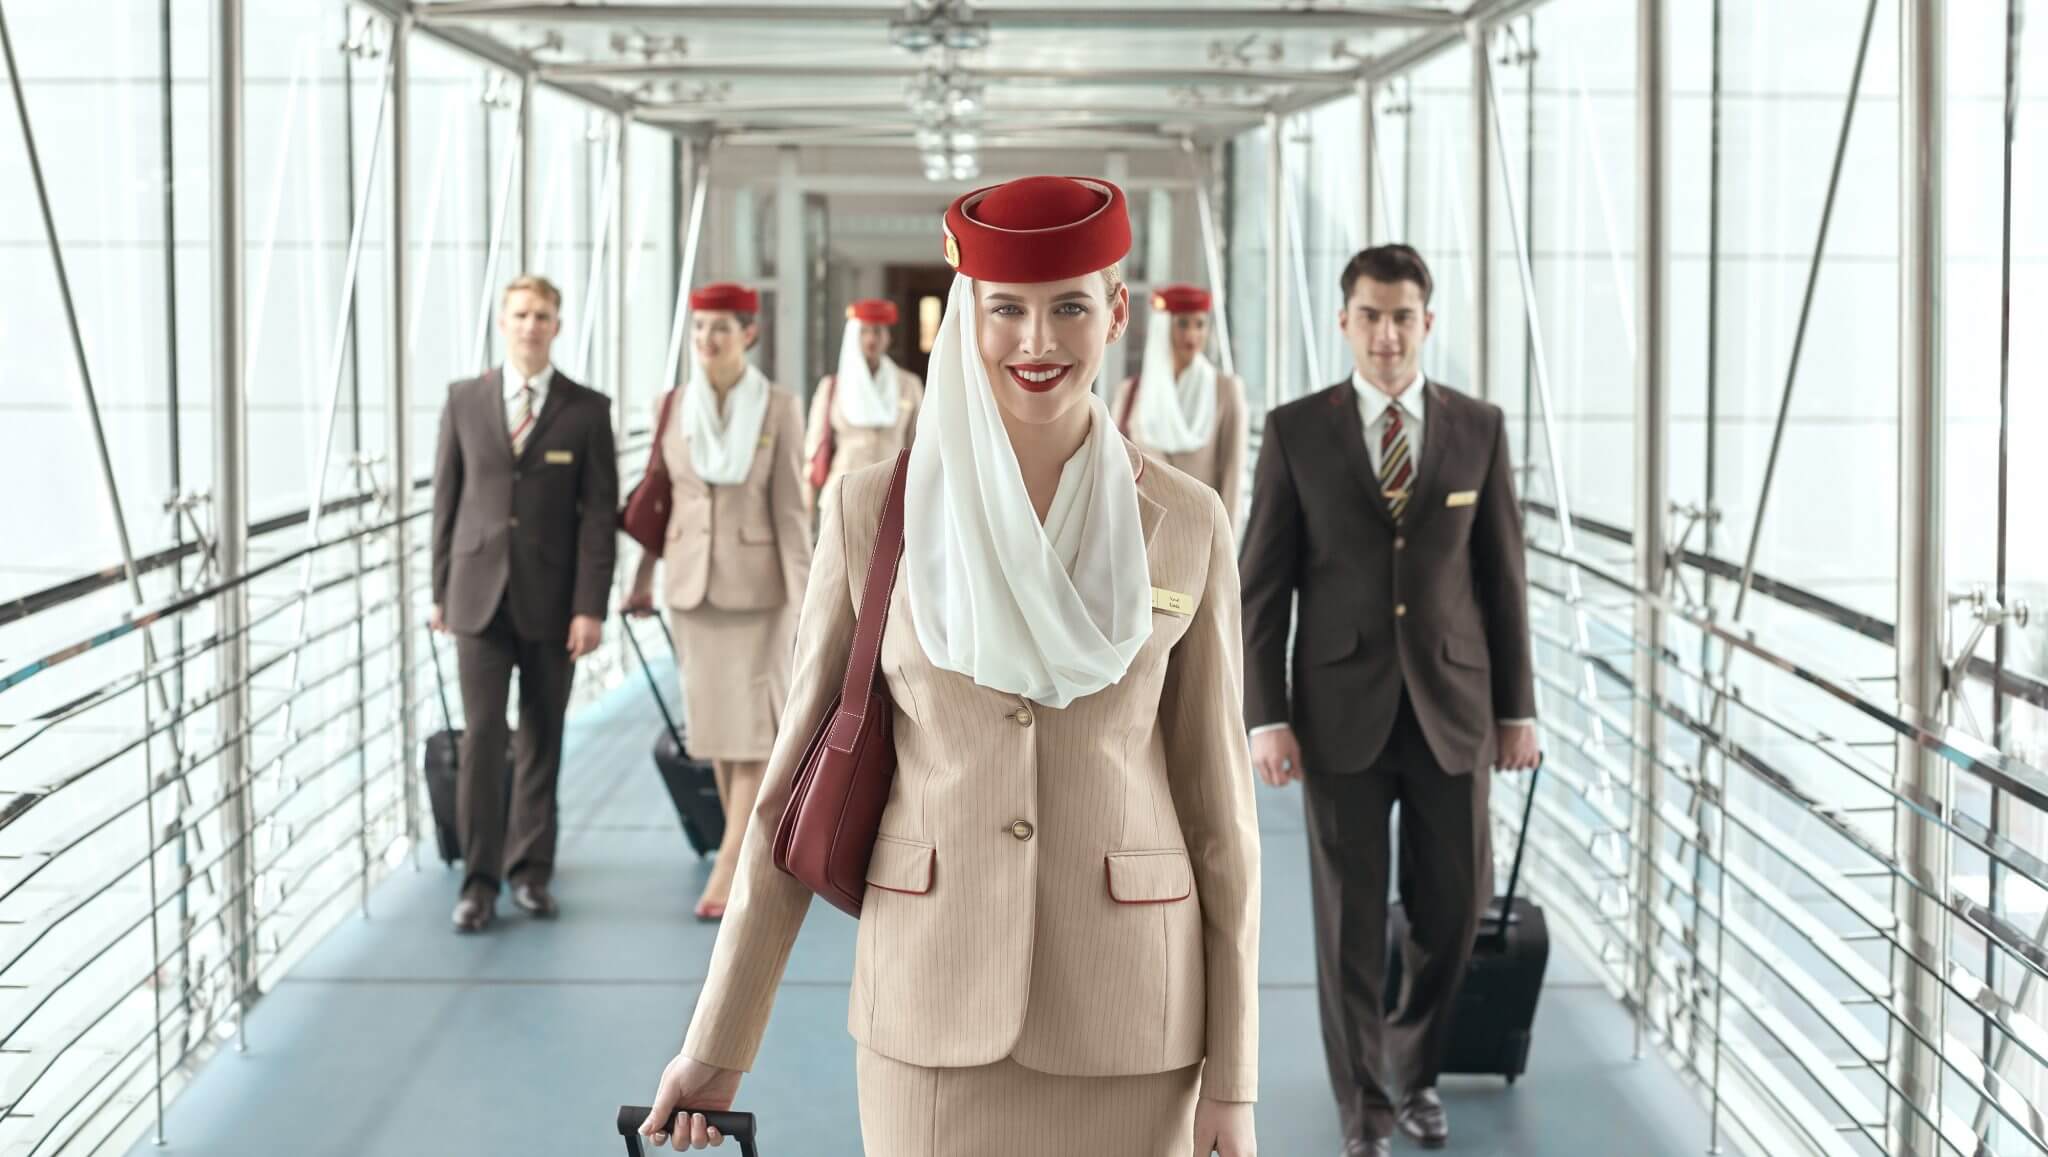 Age Limit For Flight Attendants: What You Need to Know